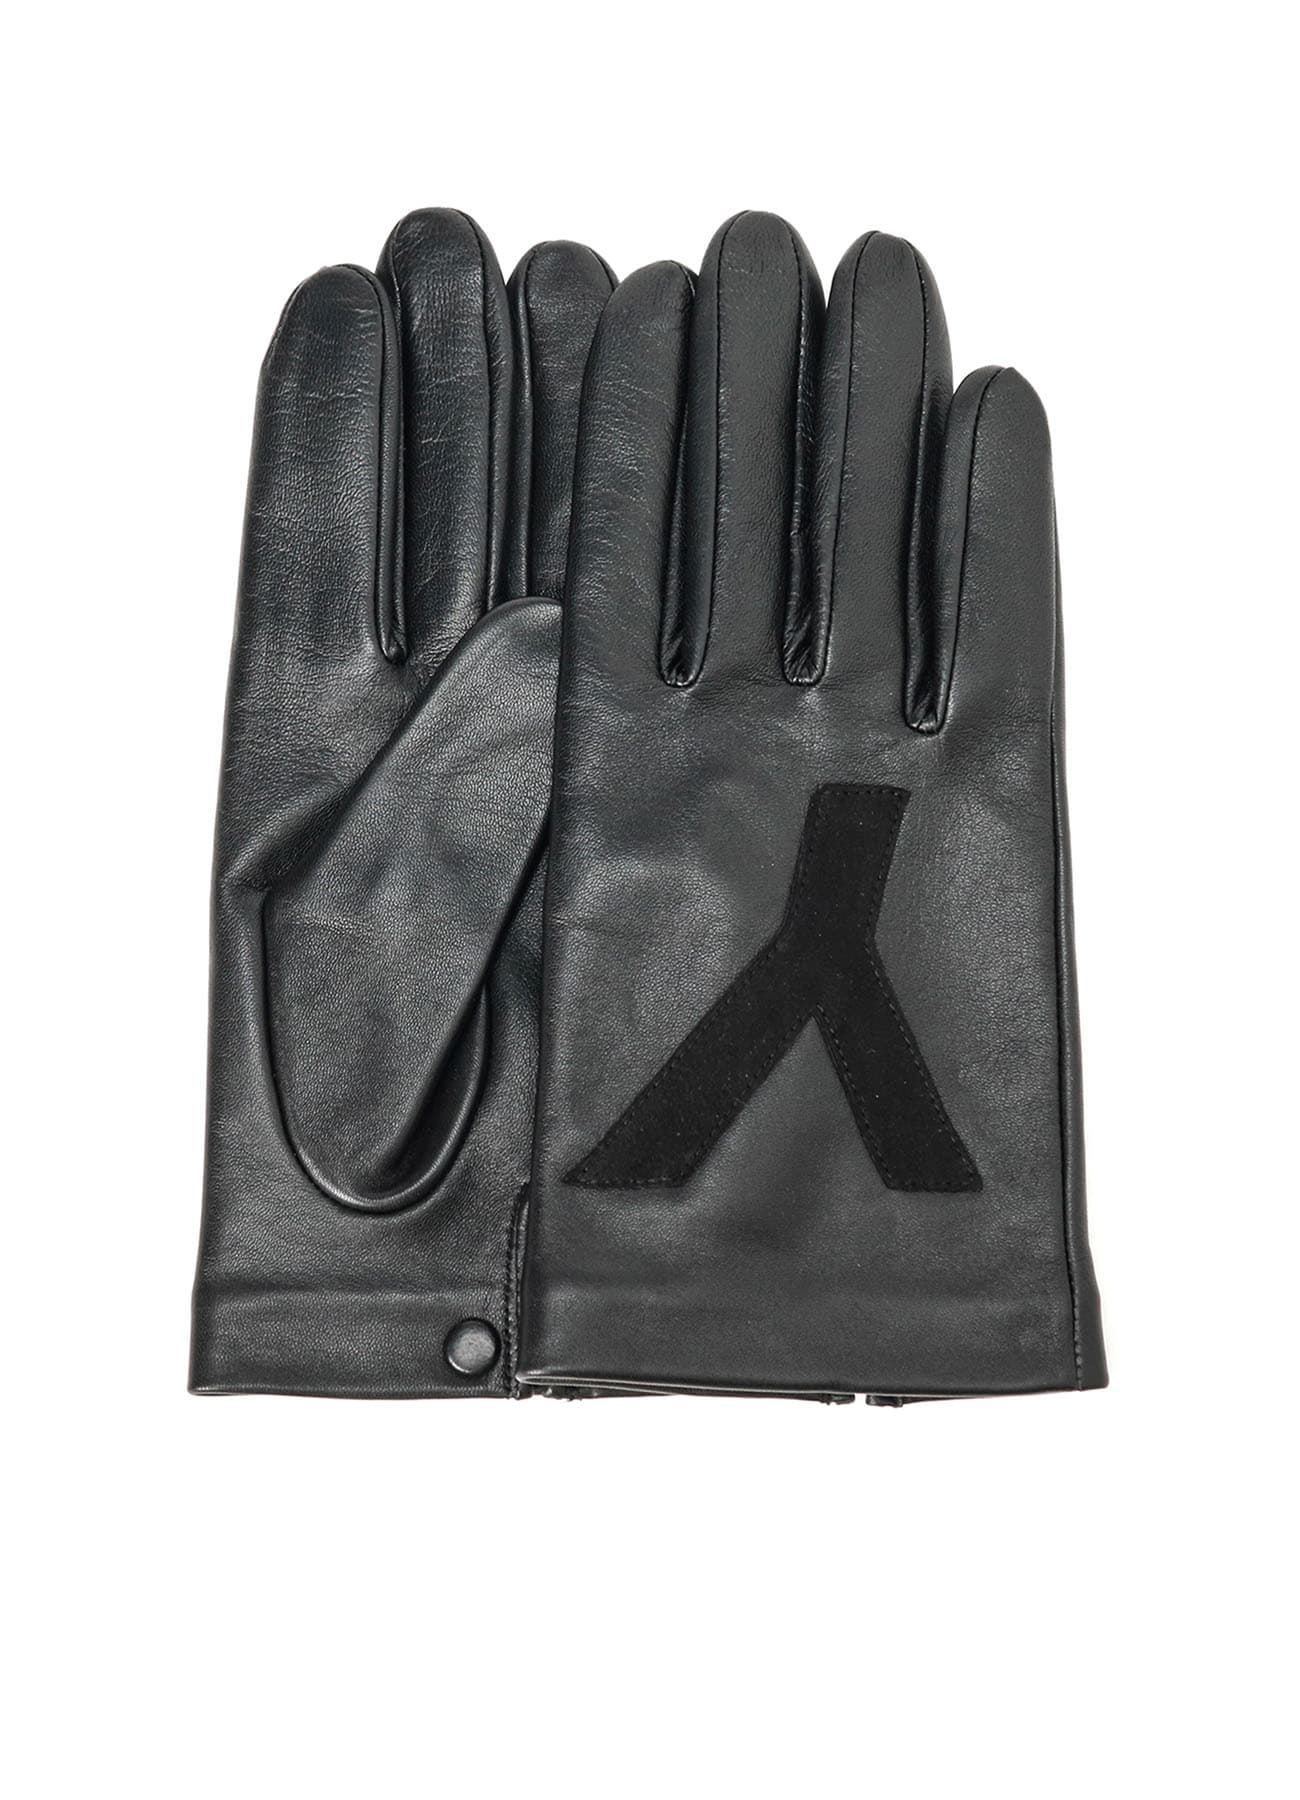 【7/6 10:00 Release】G LAMB SHORT GLOVES WITH STRAP